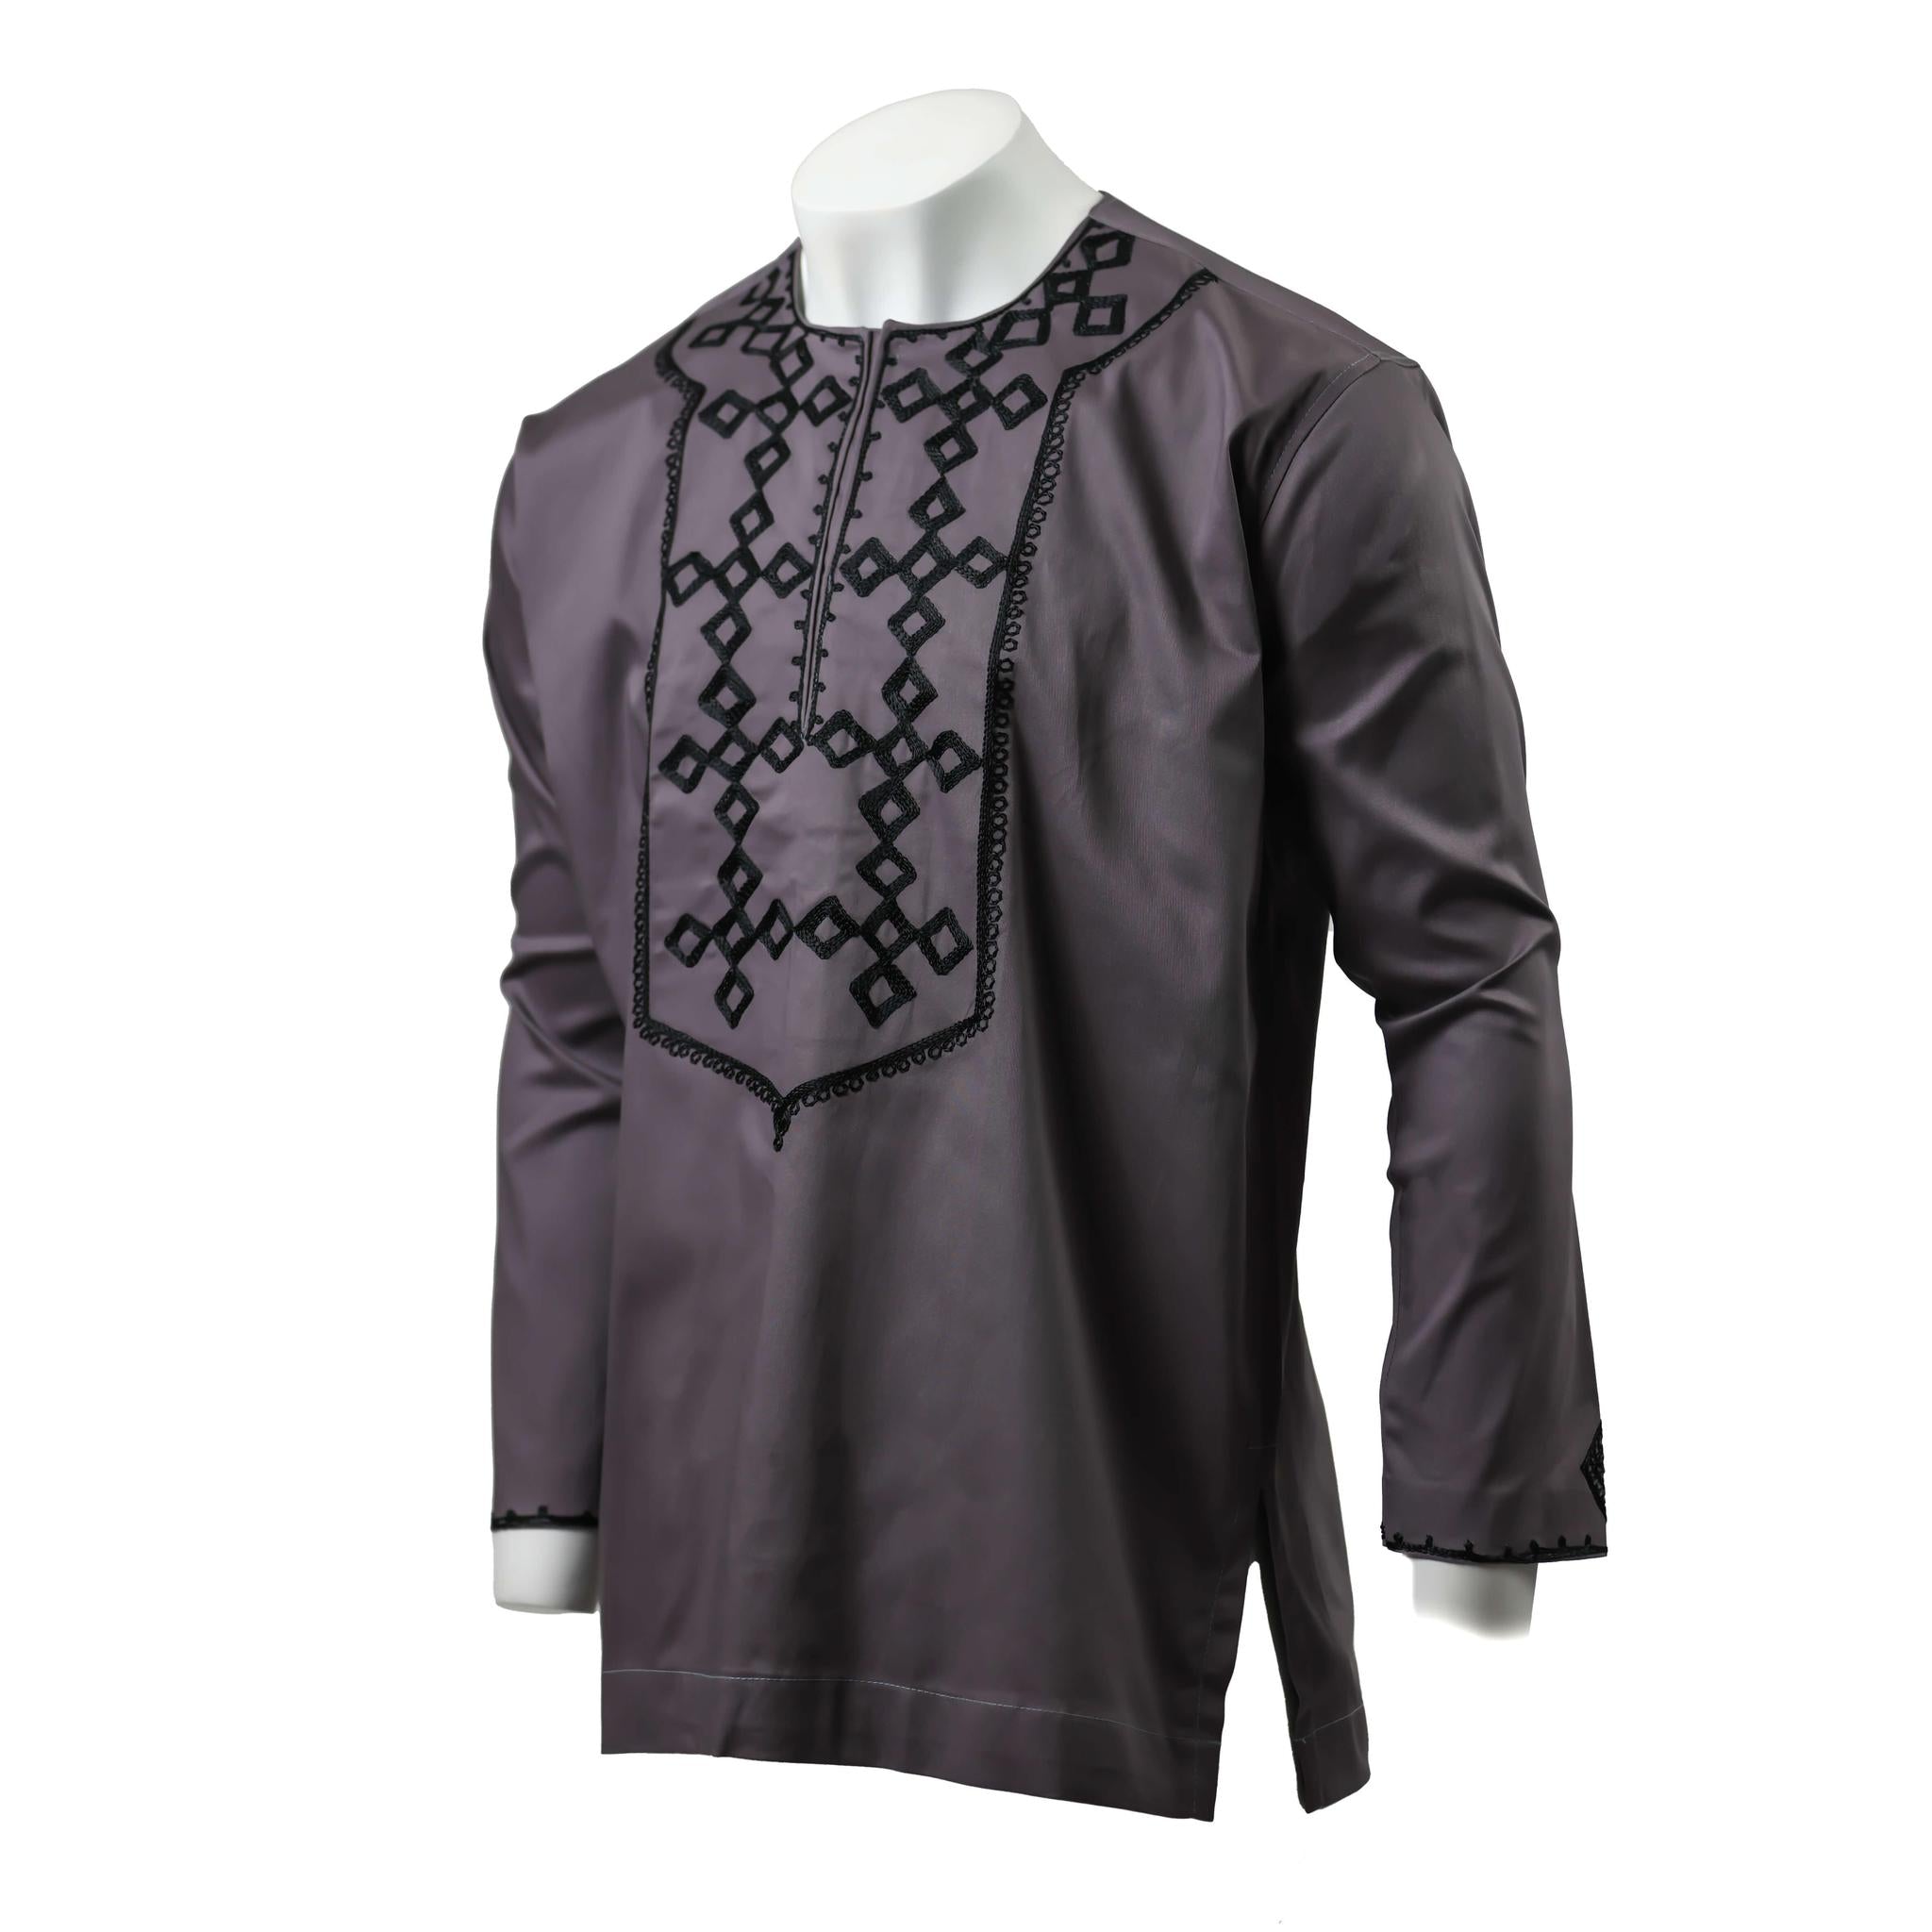 Grey & Black Embroidered Long Sleeve Top